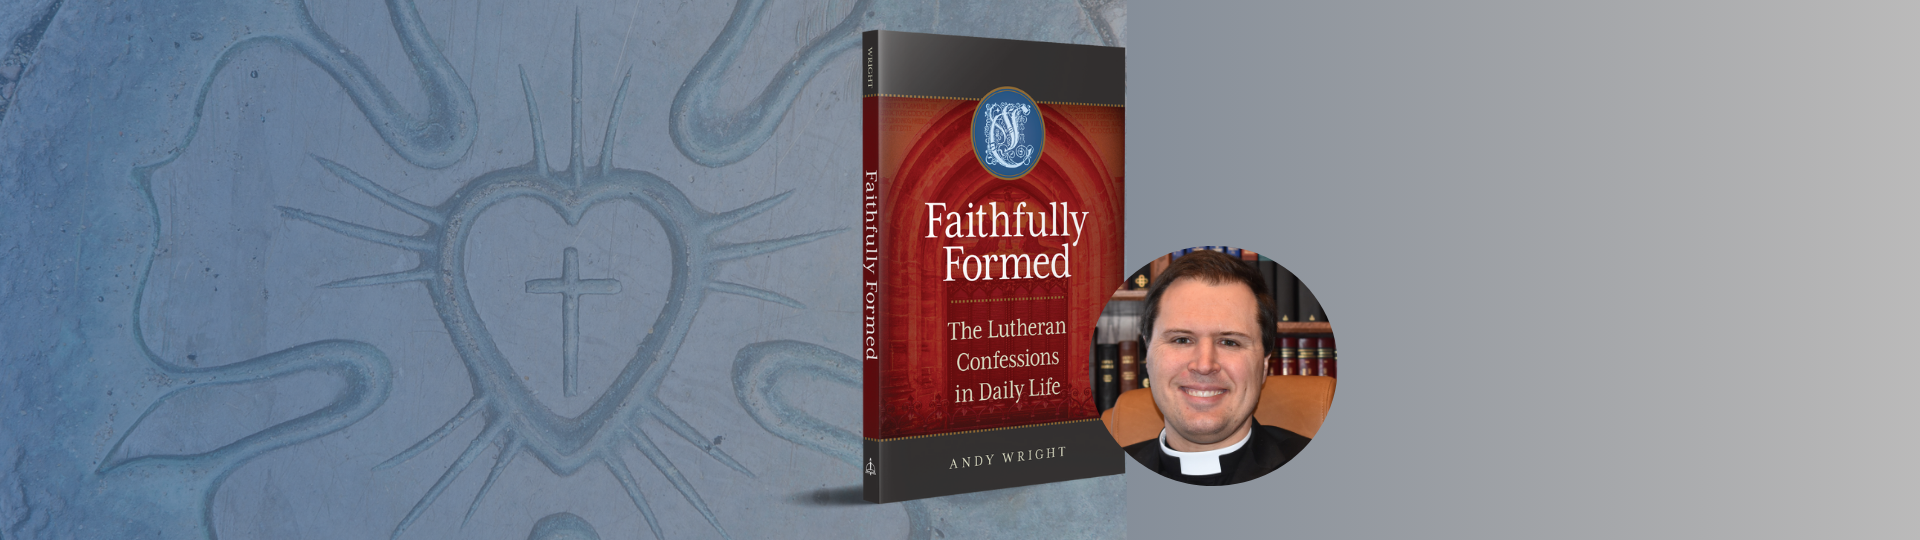 Press Release: Learn to Apply the Lutheran Confessions to Everyday Life